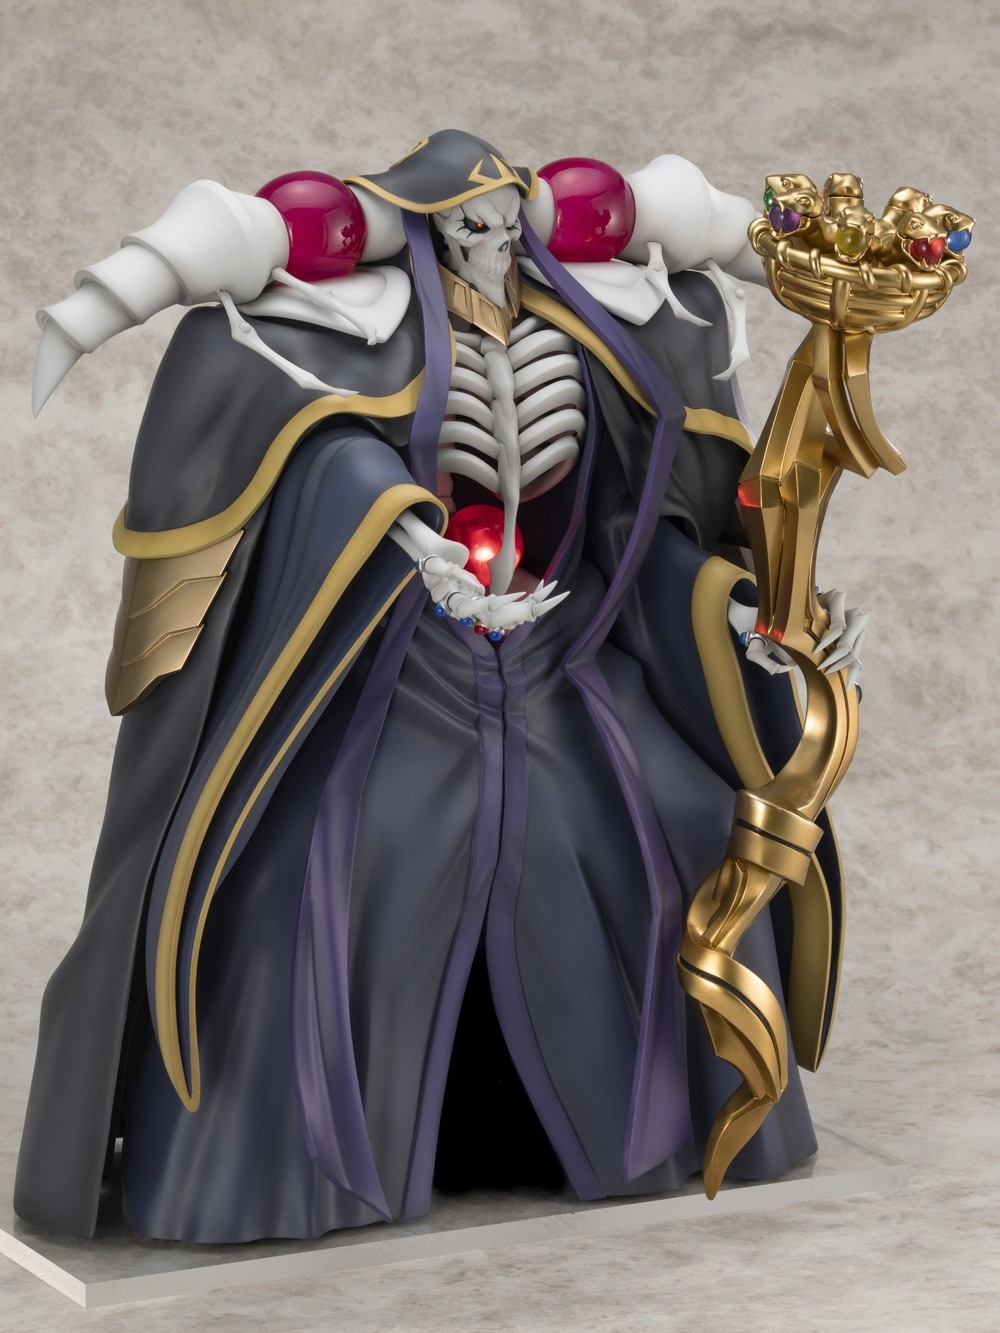 Good Smile Nendoroid 631 Overlord Ainz Ooal Gown – DREAM Playhouse